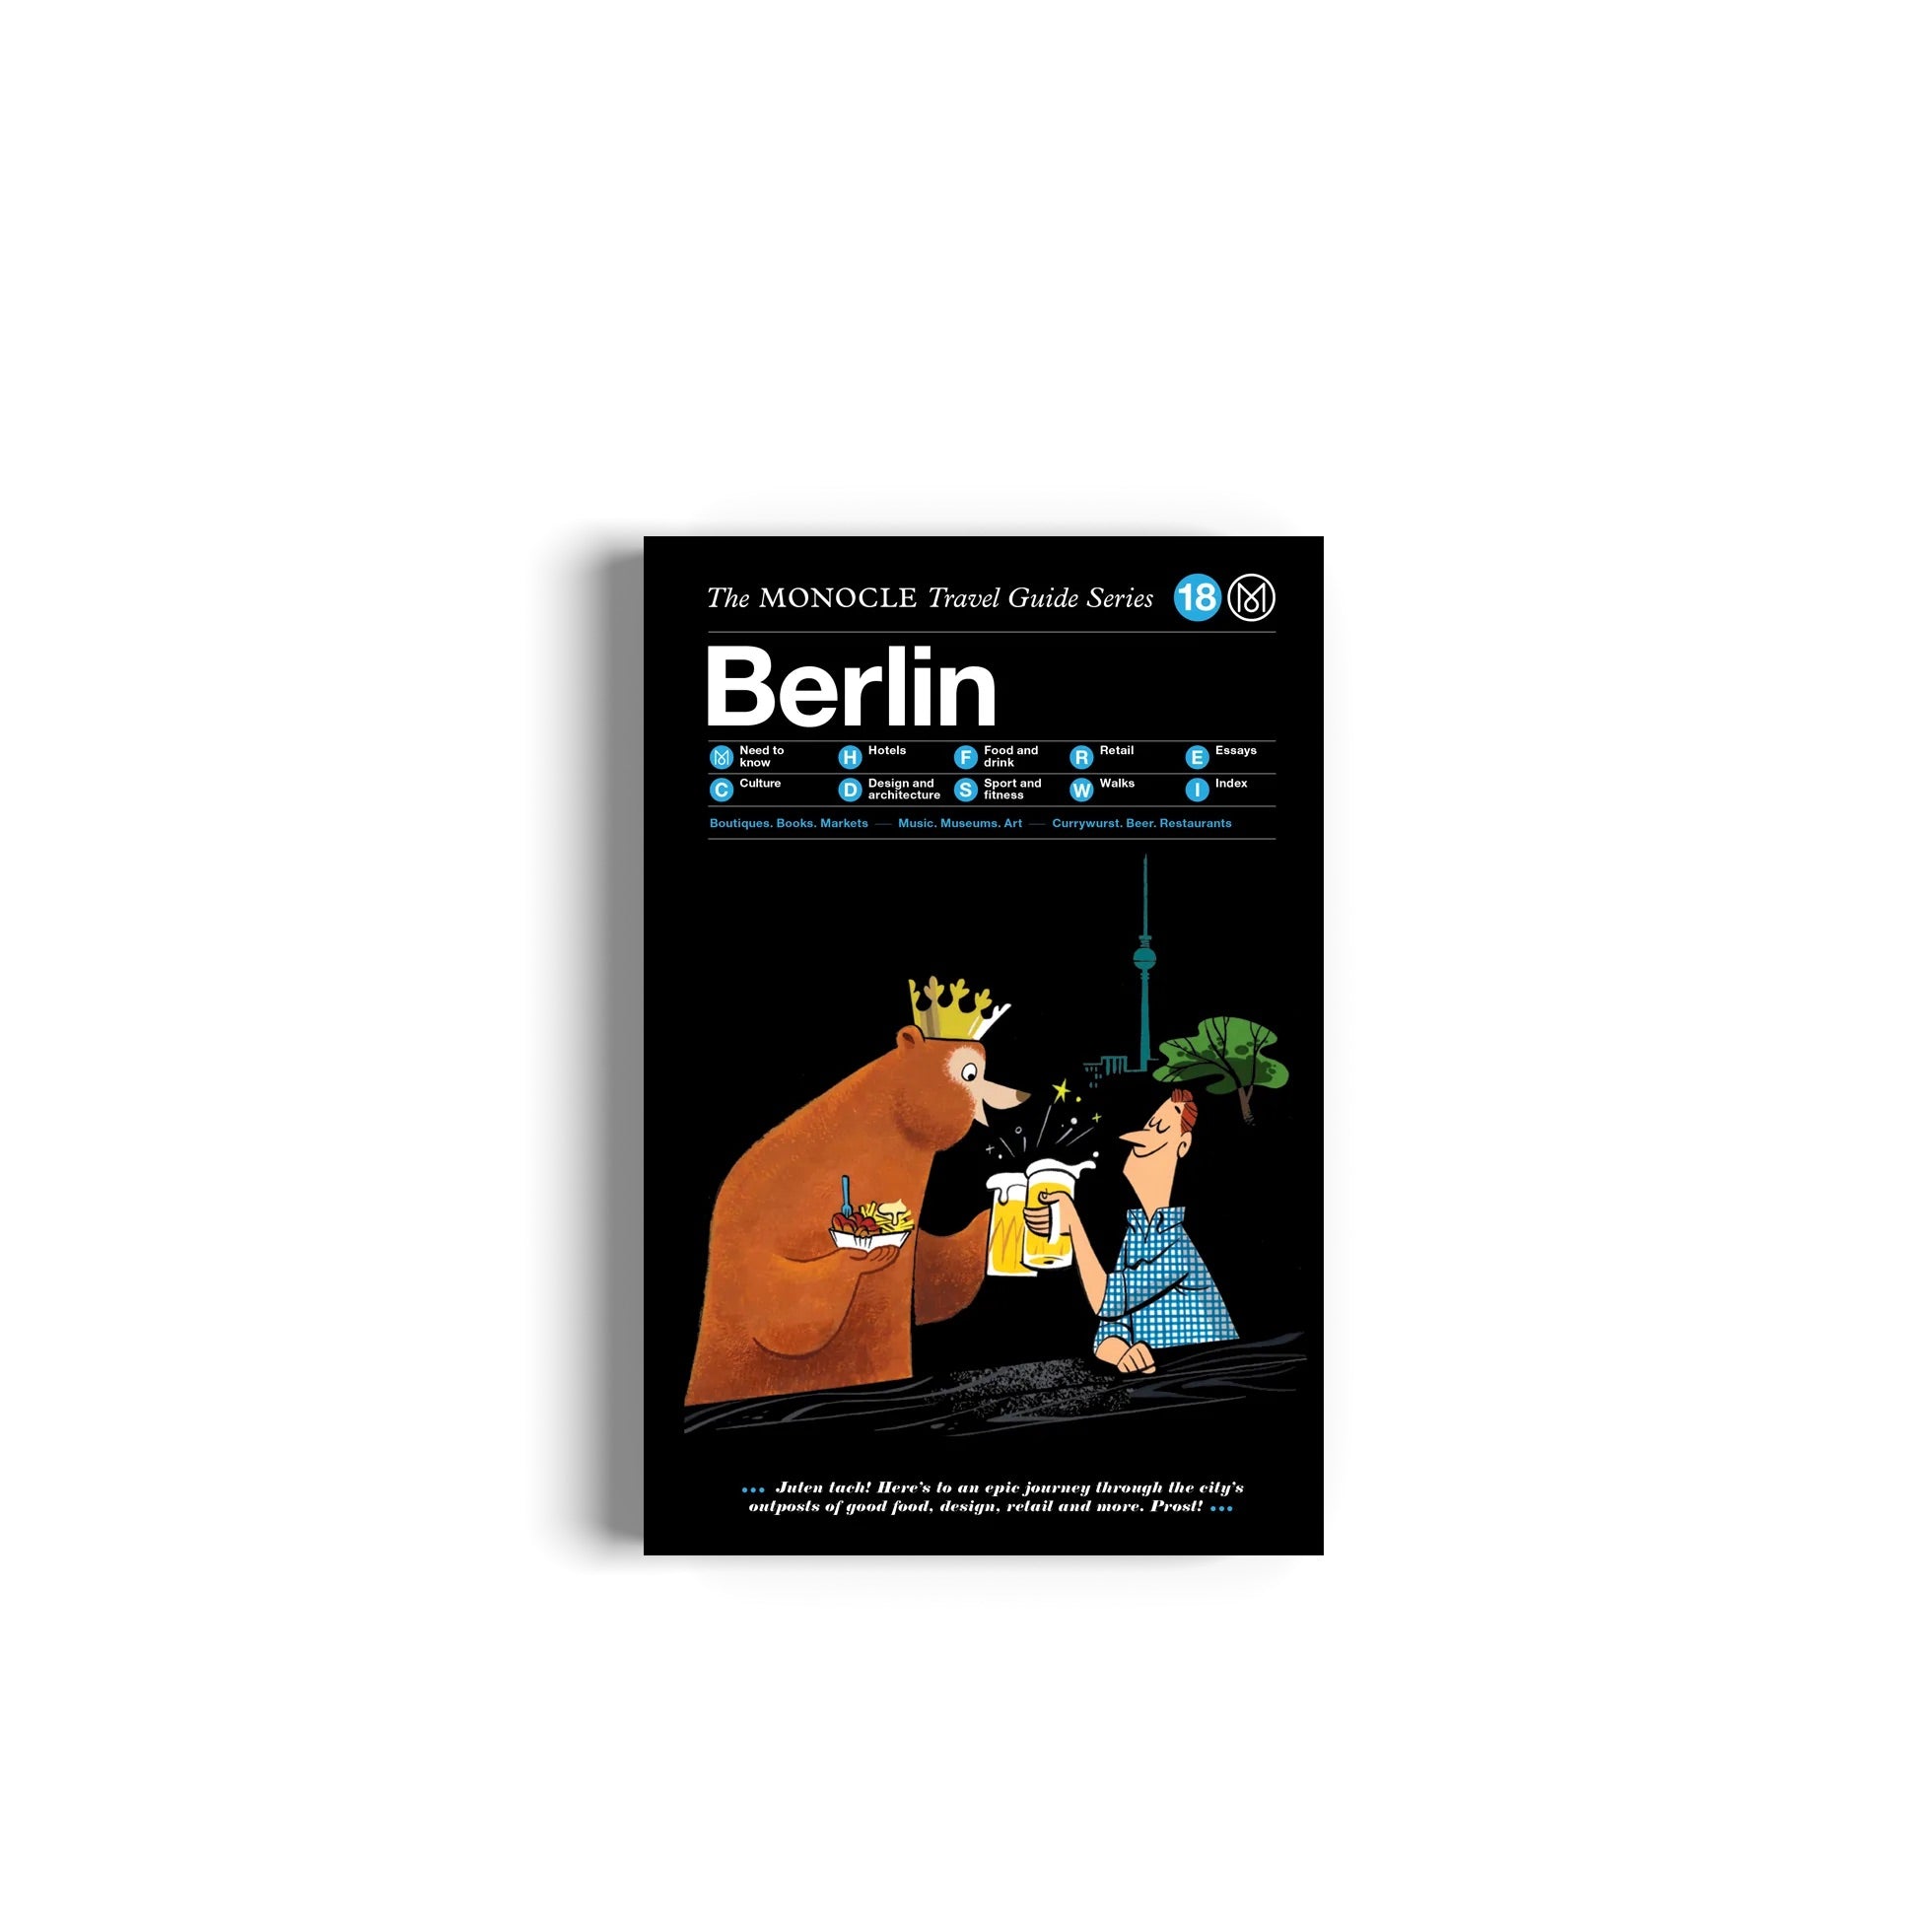 BERLIN: THE MONOCLE TRAVEL GUIDE SERIES